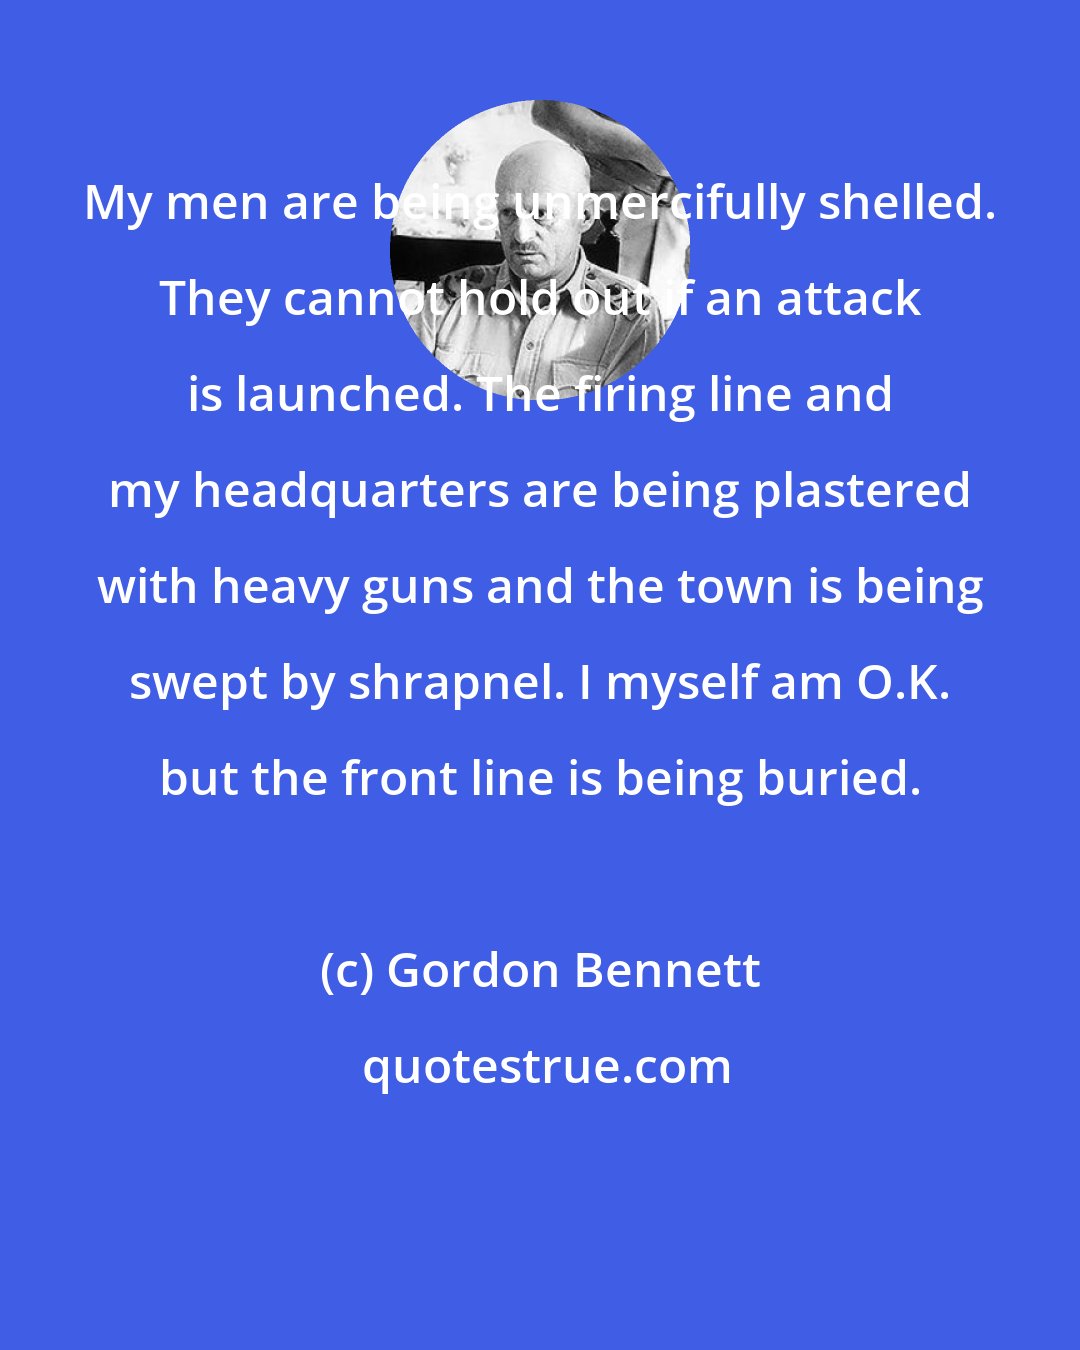 Gordon Bennett: My men are being unmercifully shelled. They cannot hold out if an attack is launched. The firing line and my headquarters are being plastered with heavy guns and the town is being swept by shrapnel. I myself am O.K. but the front line is being buried.